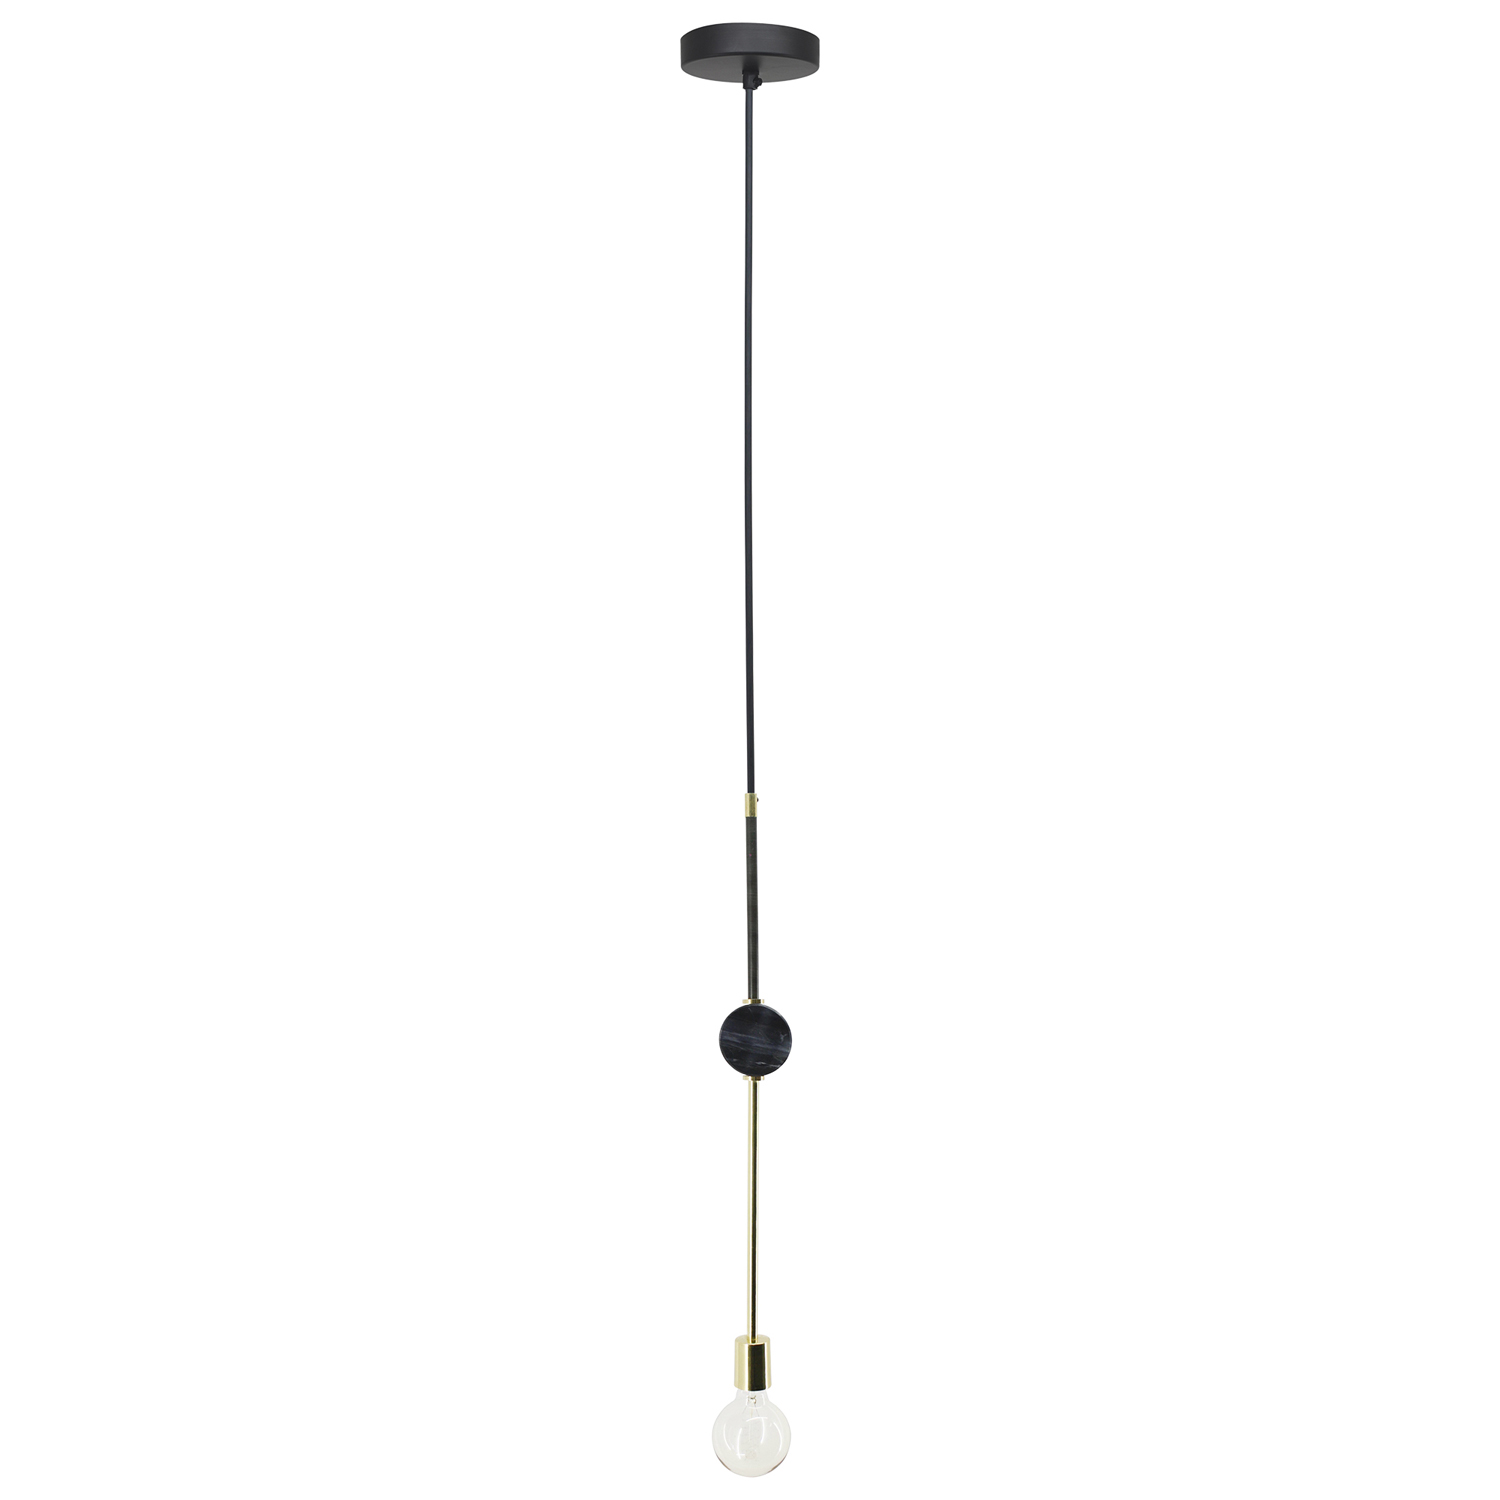 Ren-Wil Imperial Ceiling Fixture - Shiny Brass/Black Marble